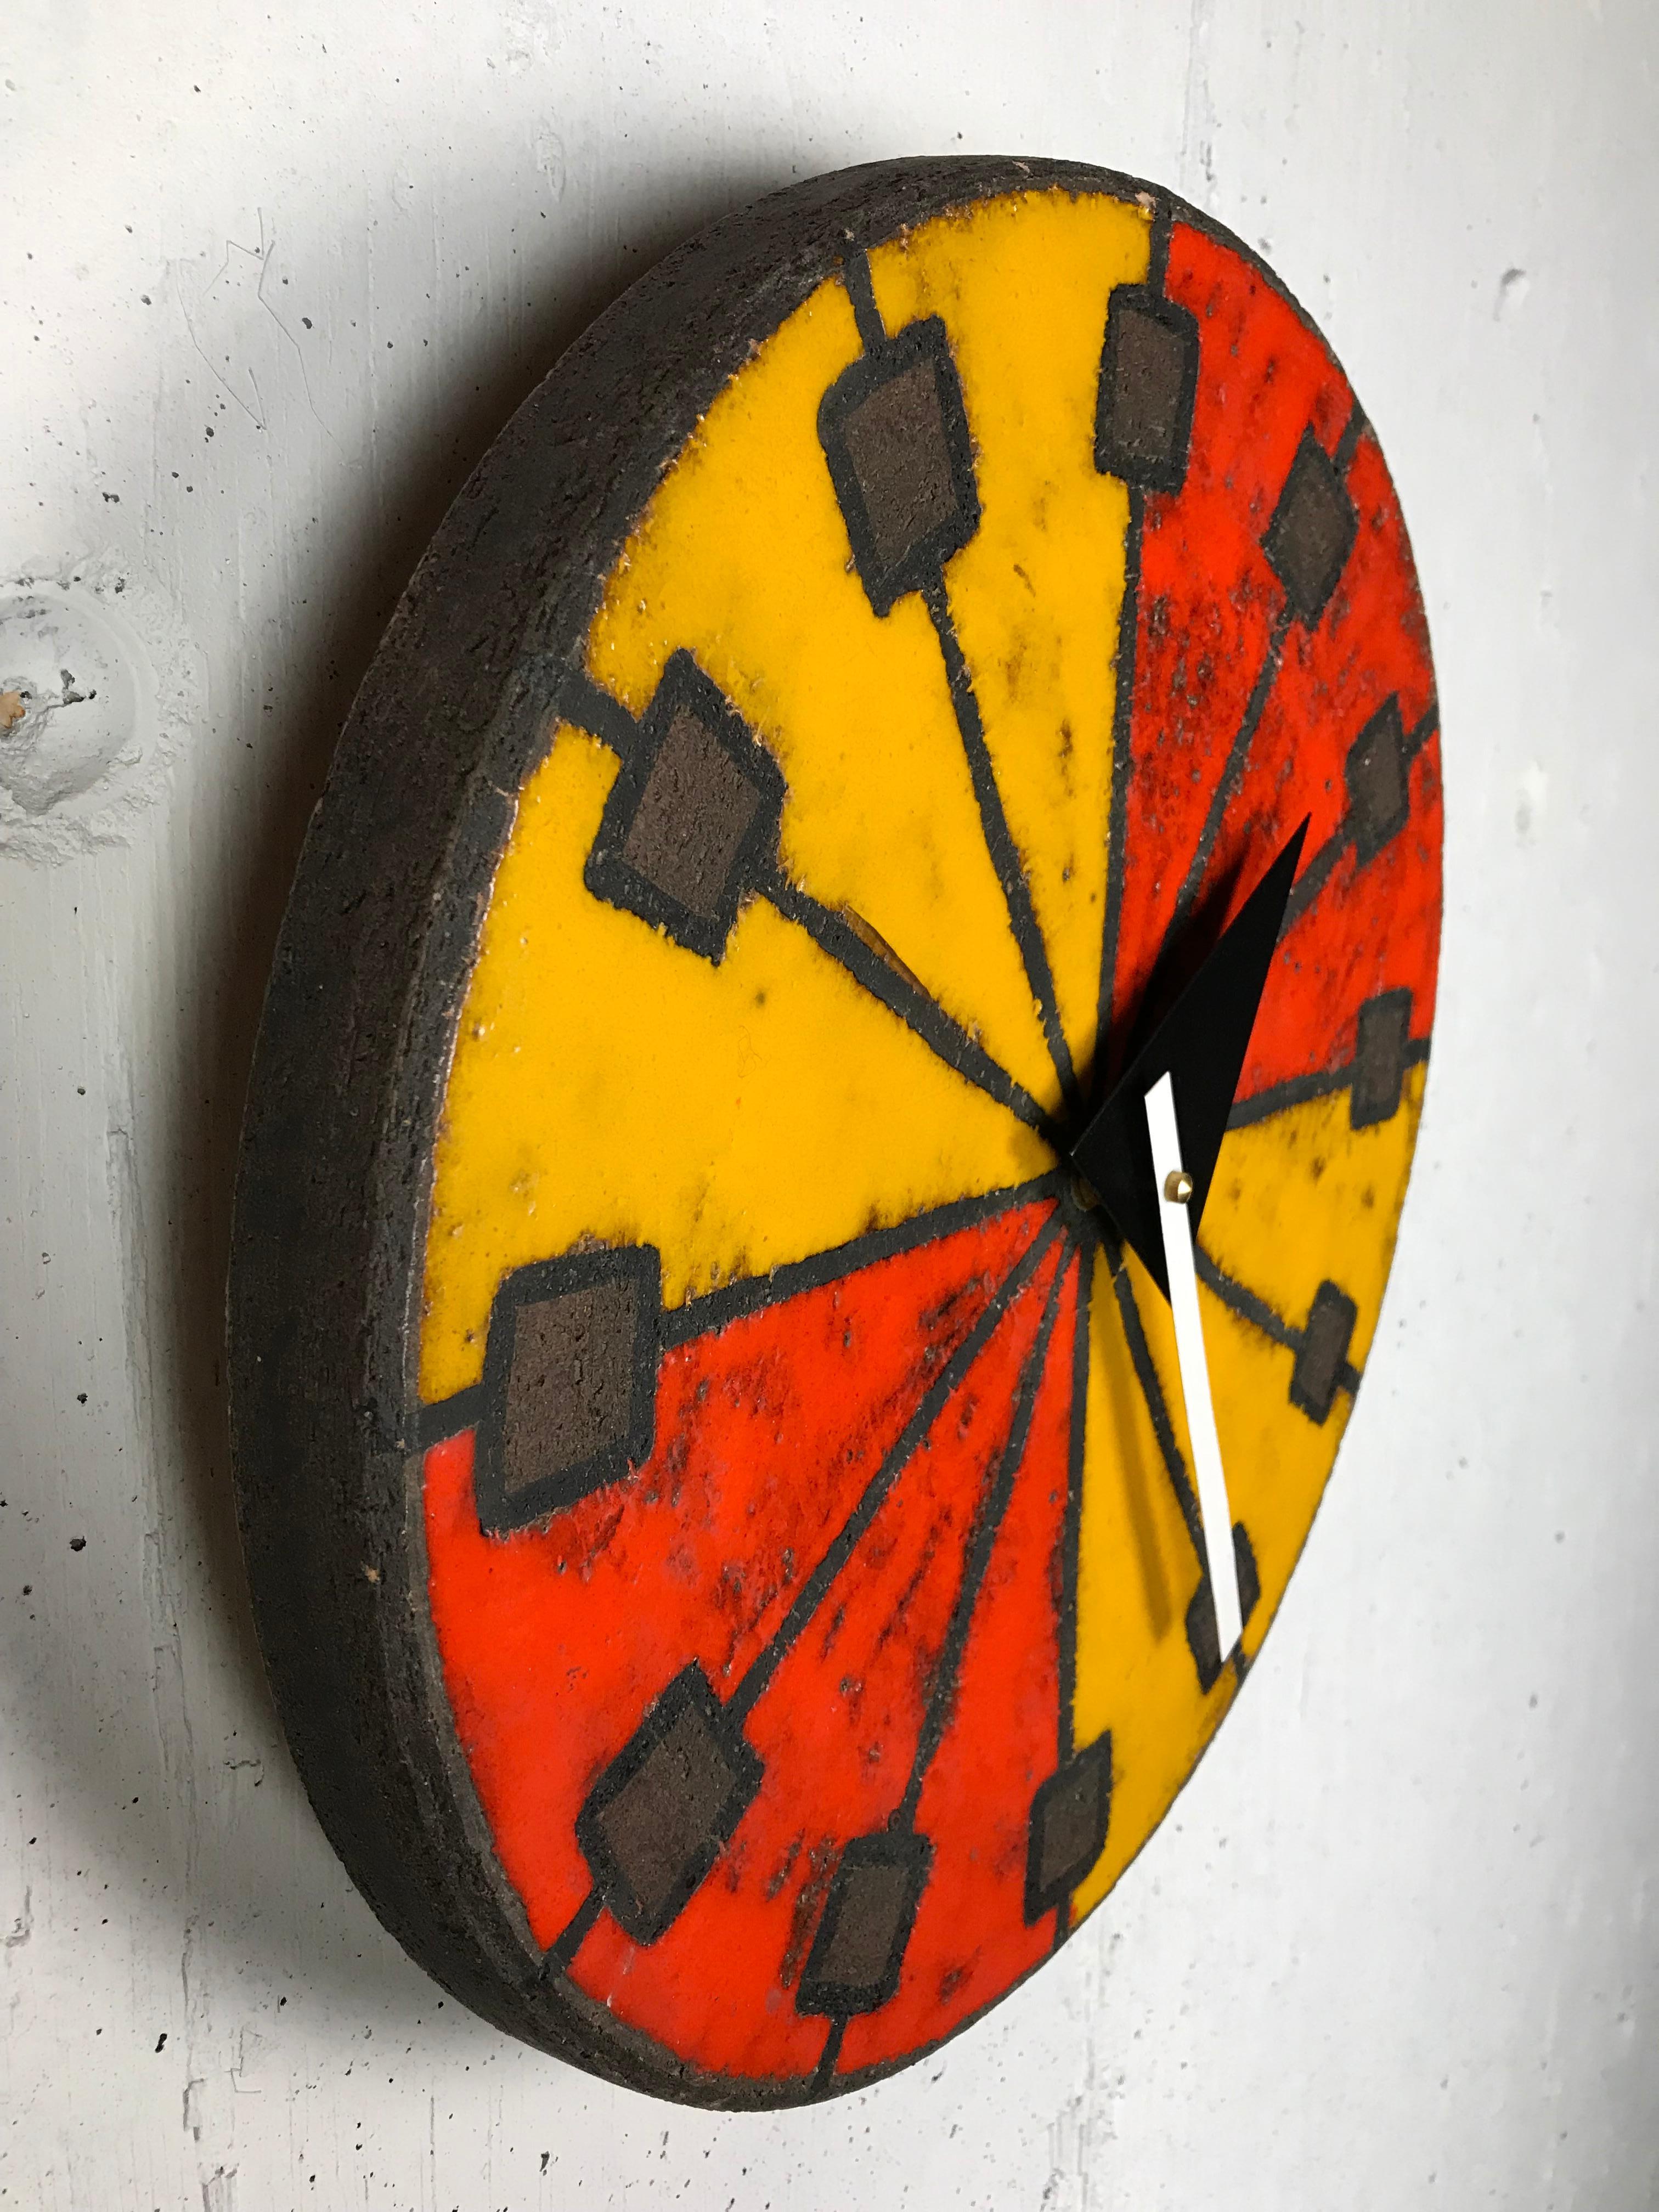 Eye-catching modernist Italian ceramic wall clock by Bitossi (Italian potter) manufactured by Howard Miller using hands designed by George Nelson (American designer). This desirable glaze has brilliant red and orange colors and a sgraffito technique